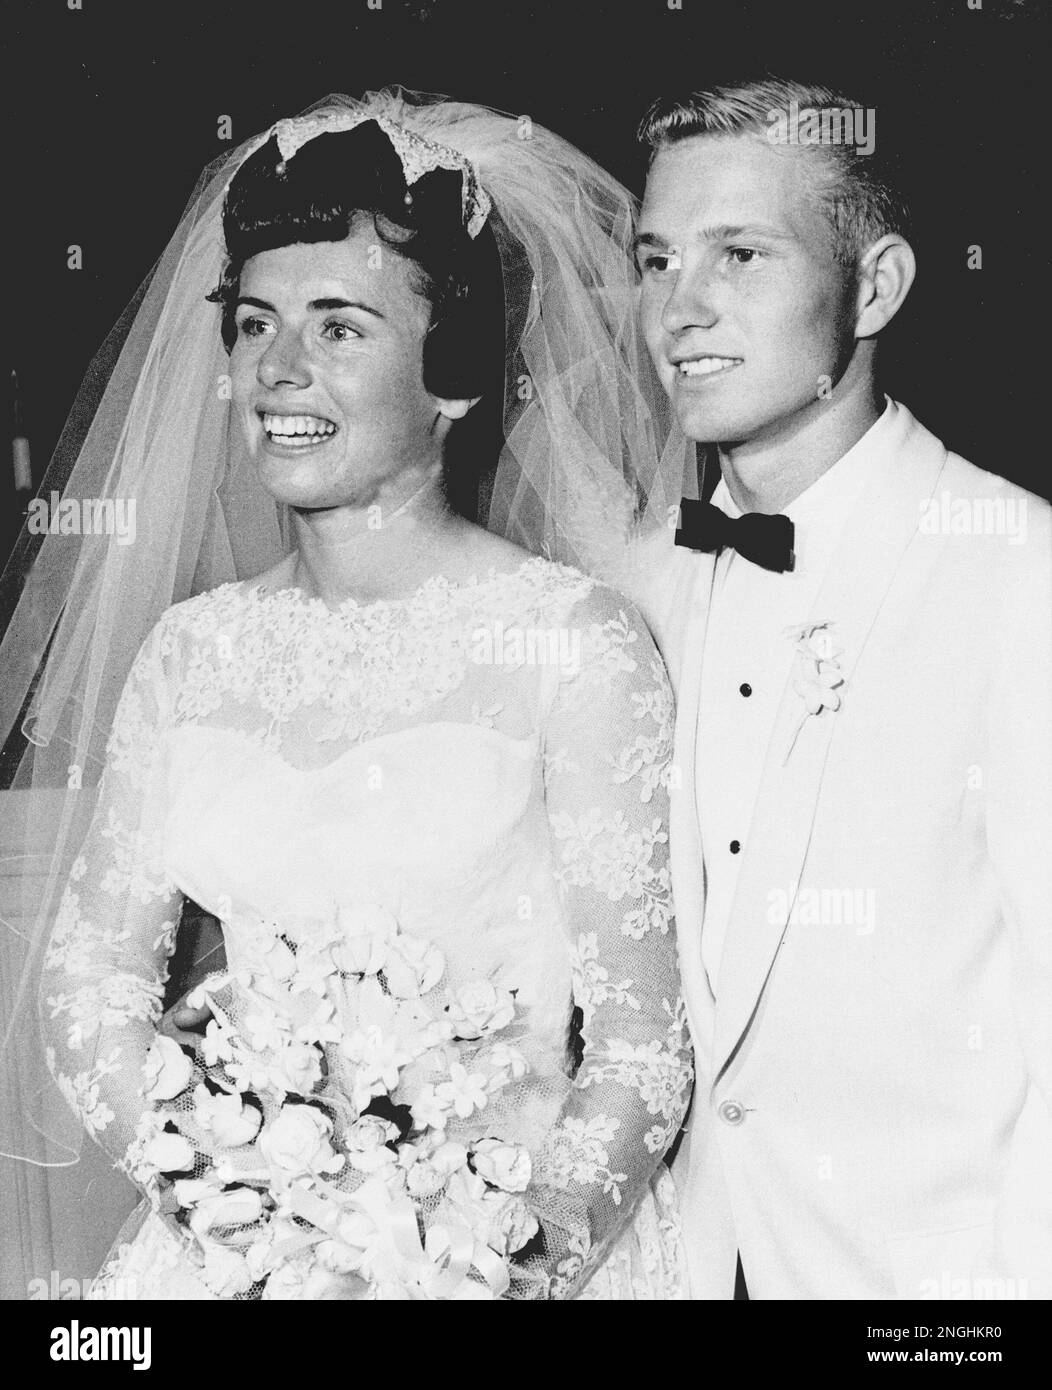 Billie Jean Moffit, 21, and Larry William King, 20, leave First Church of  the Brethern in Long Beach, Ca., after their marriage on Sept. 17, 1965.  The bride, Billie Jean King, is